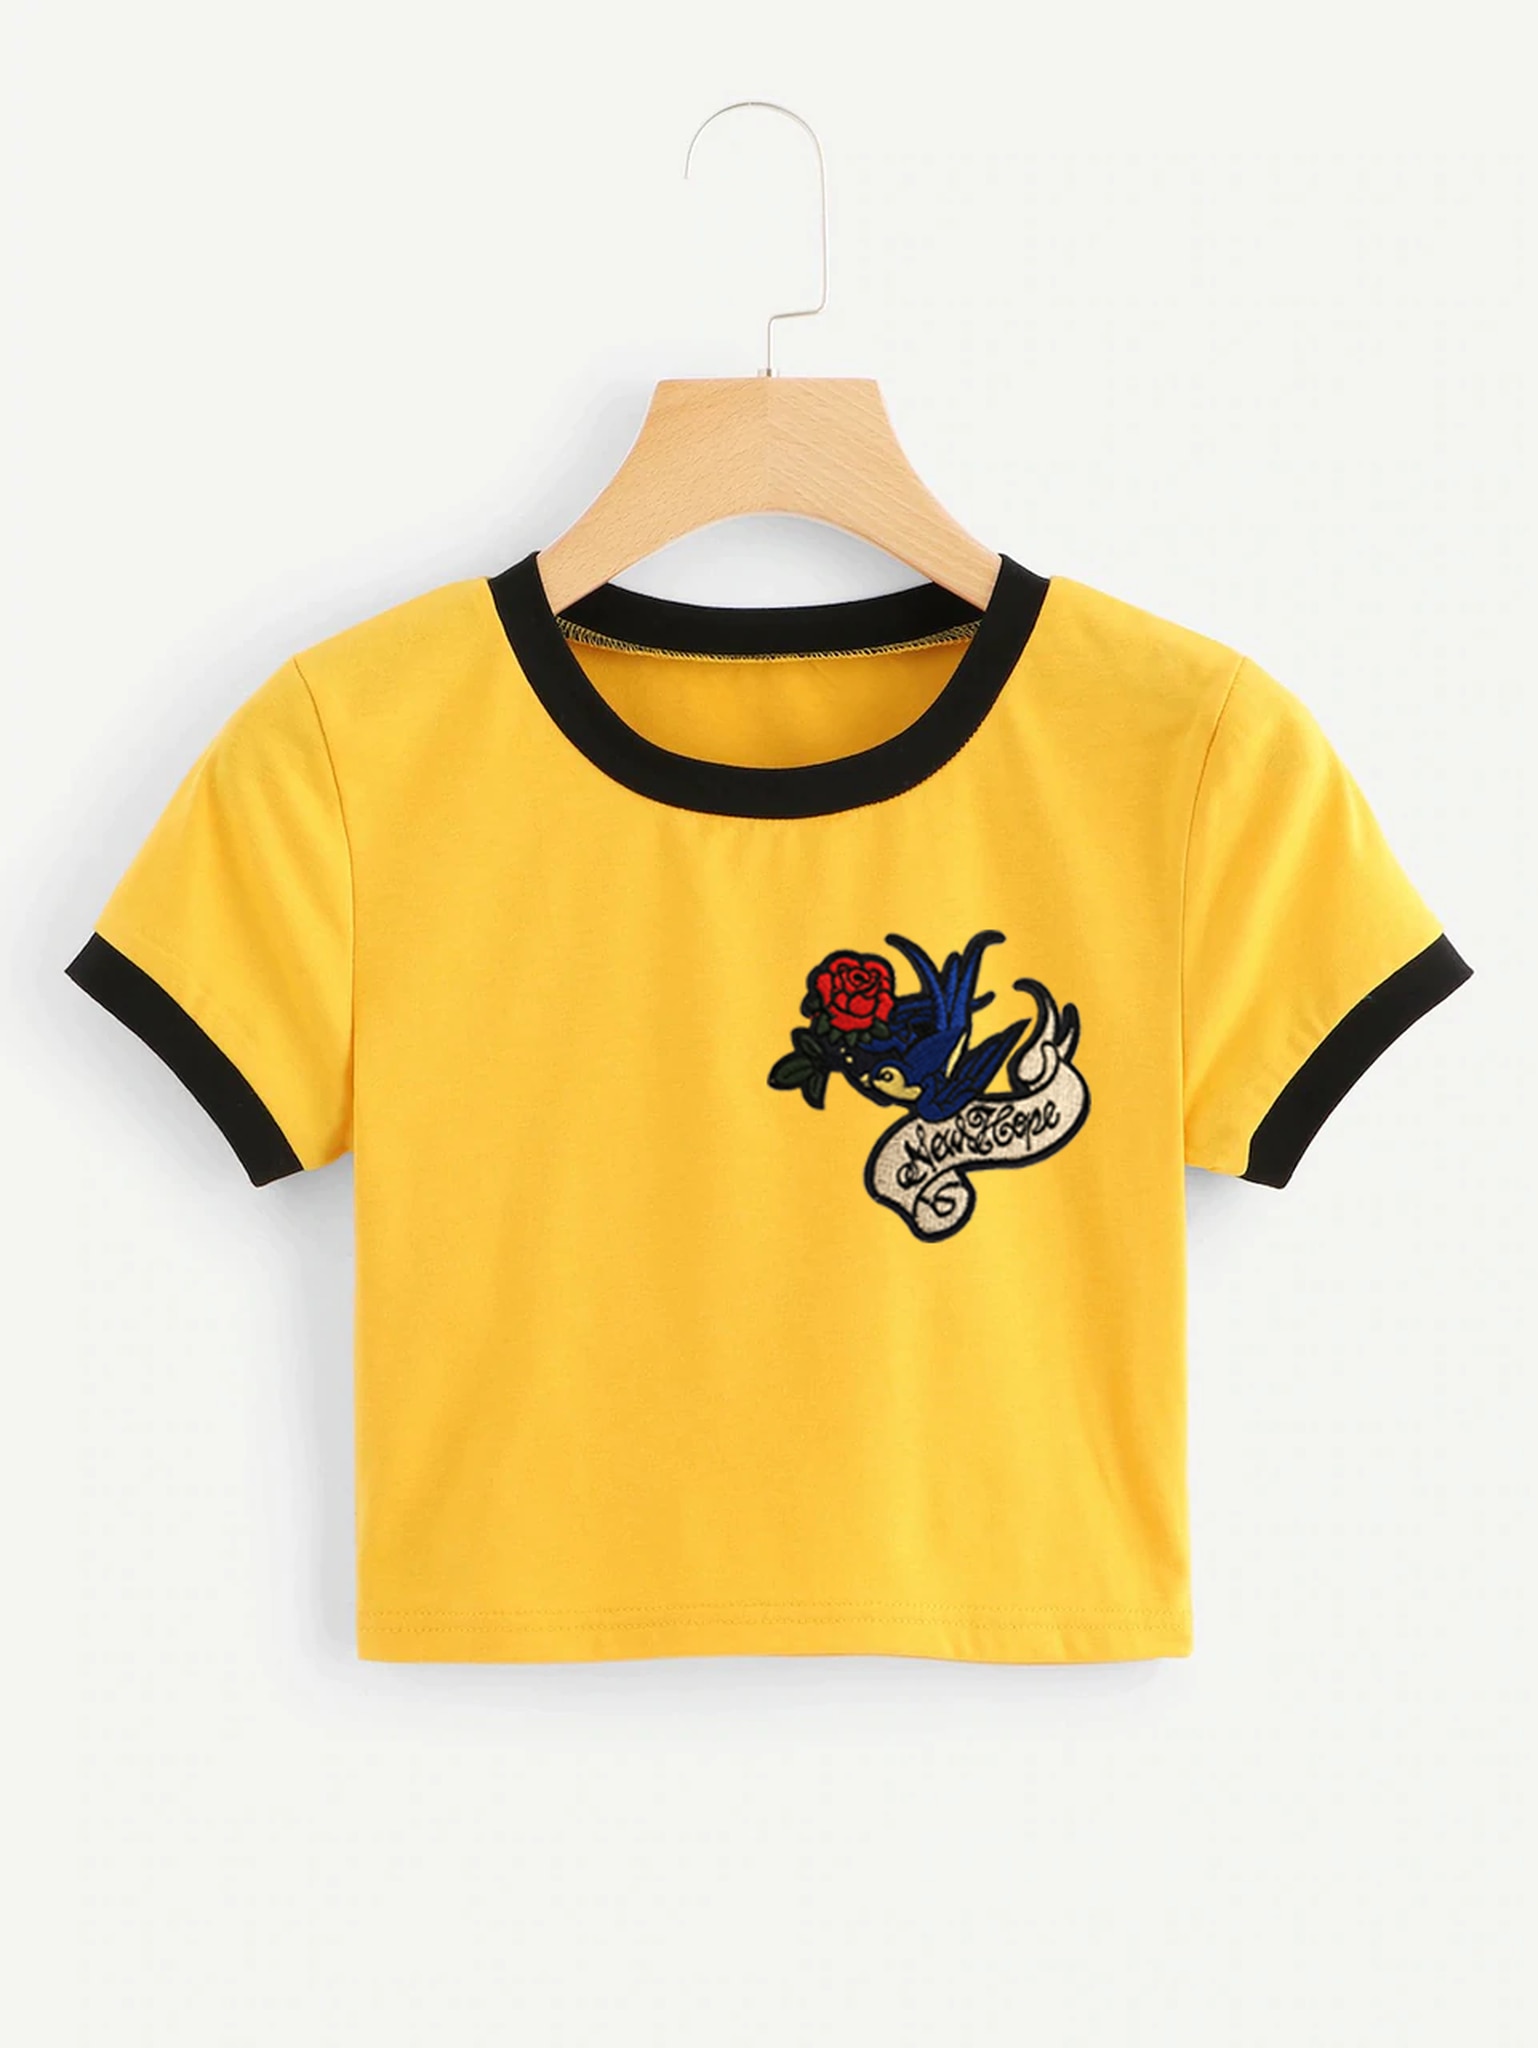 /2019/06/fifth-avenue-womens-sts57-ripzt29-embroidered-crop-ringer-t-shirt-yellow-and-black-image1.jpeg